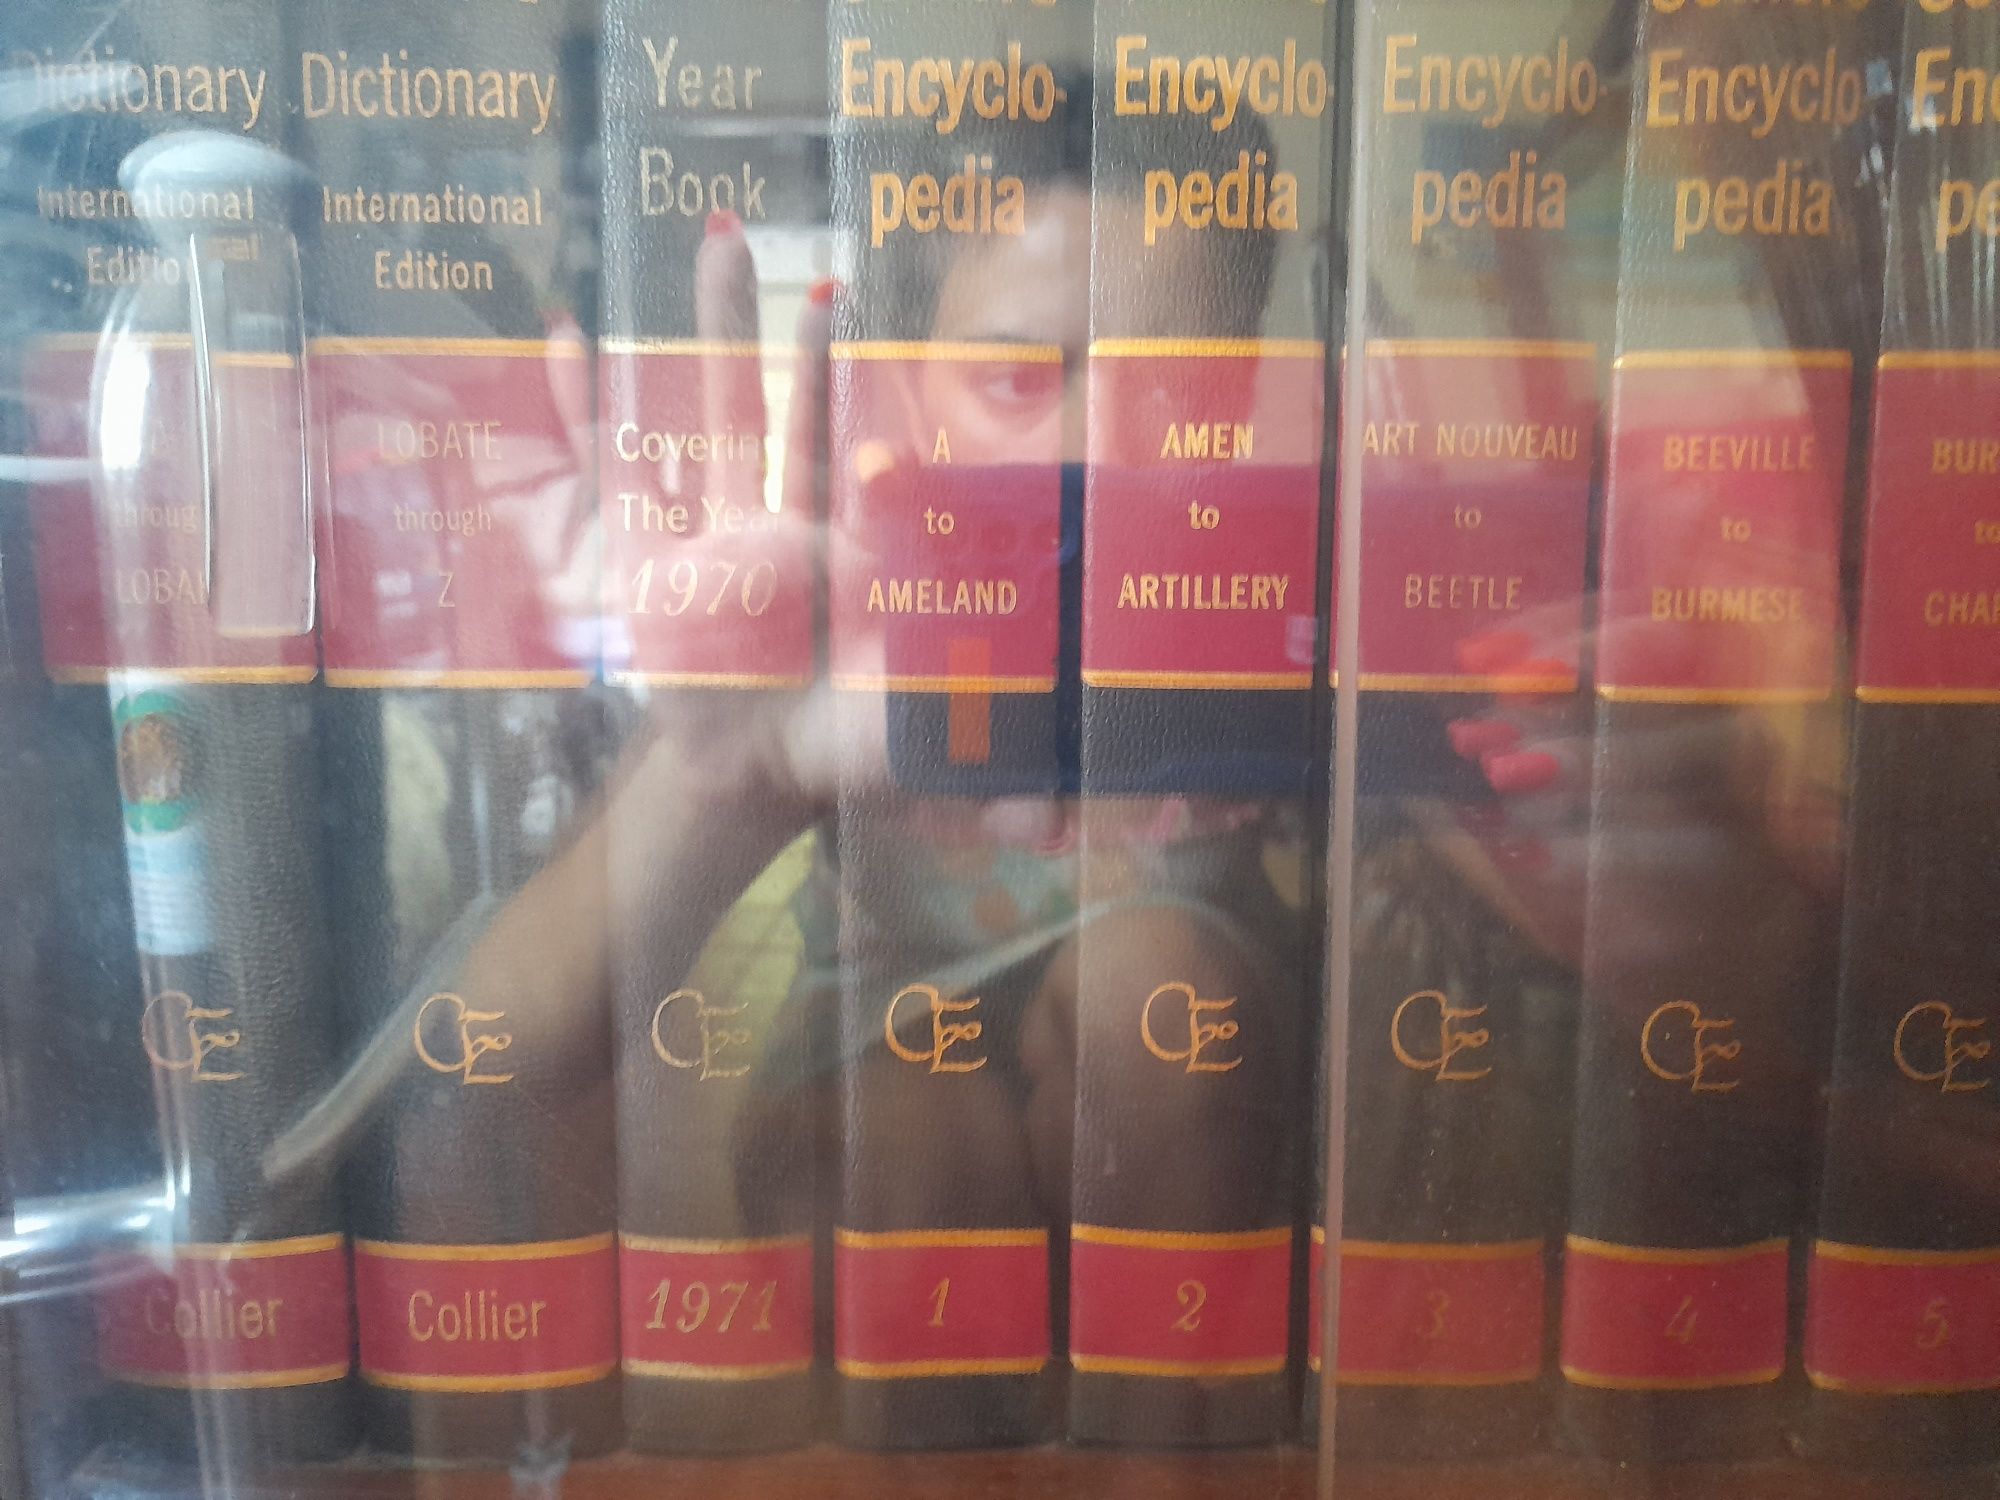 Collier's Encyclopedia 1970 (Red And Black Spine) (Complete 24 Book En